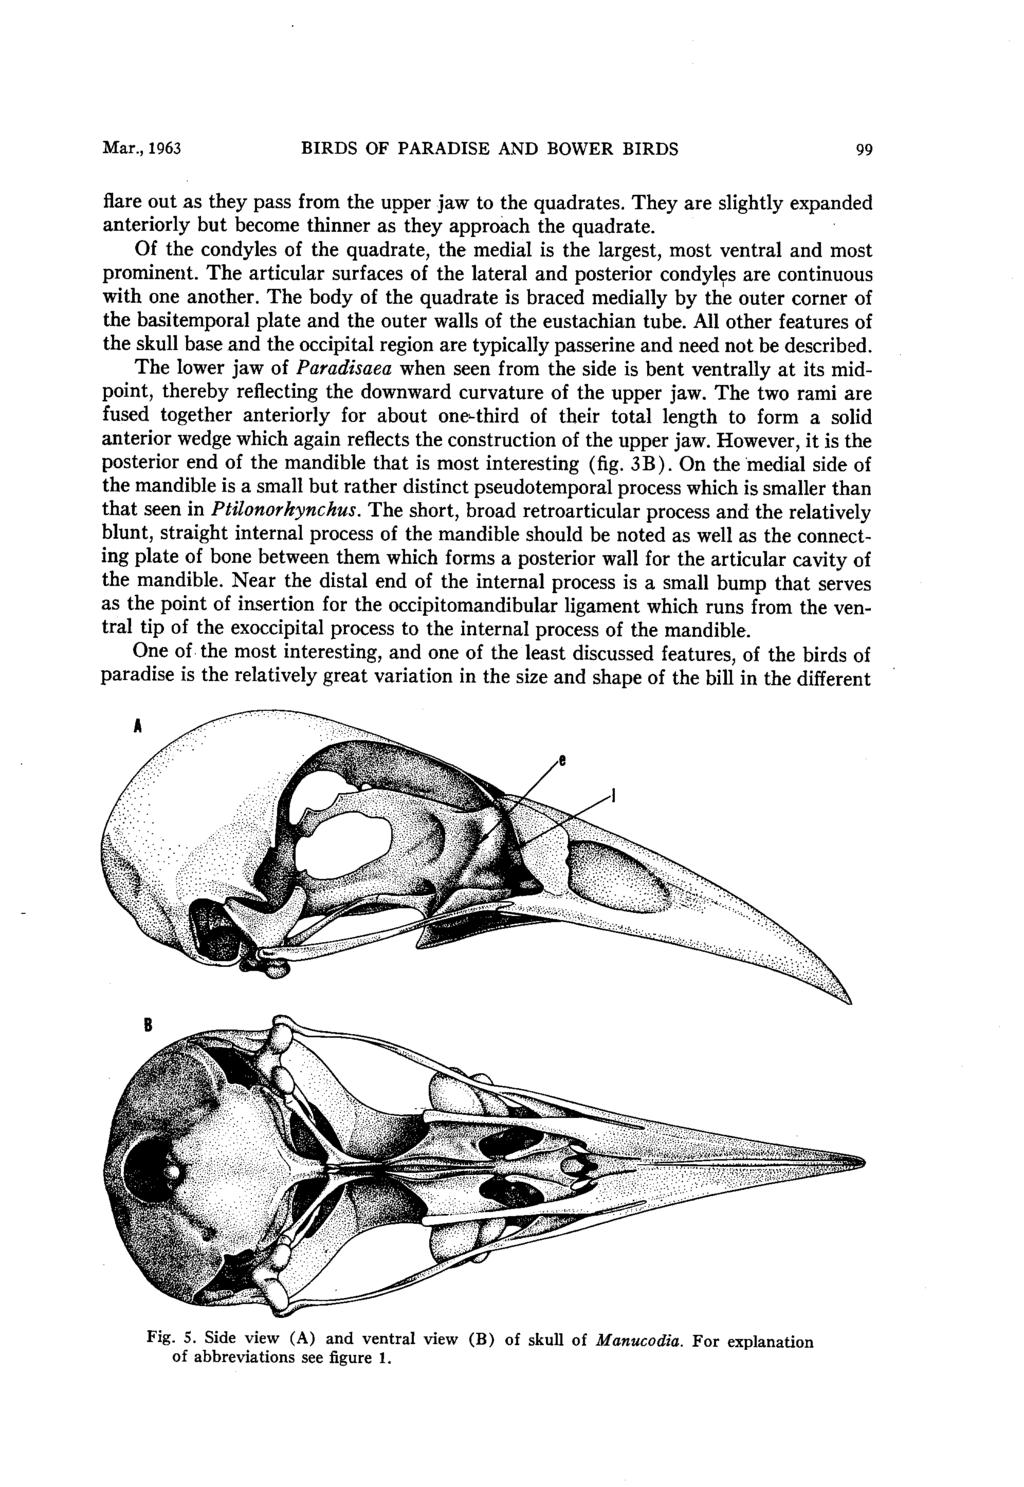 Mar., 1963 BIRDS OF PARADISE AND BOWER BIRDS 99 flare out as they pass from the upper jaw to the quadrates. They are slightly expanded anteriorly but become thinner as they approach the quadrate.